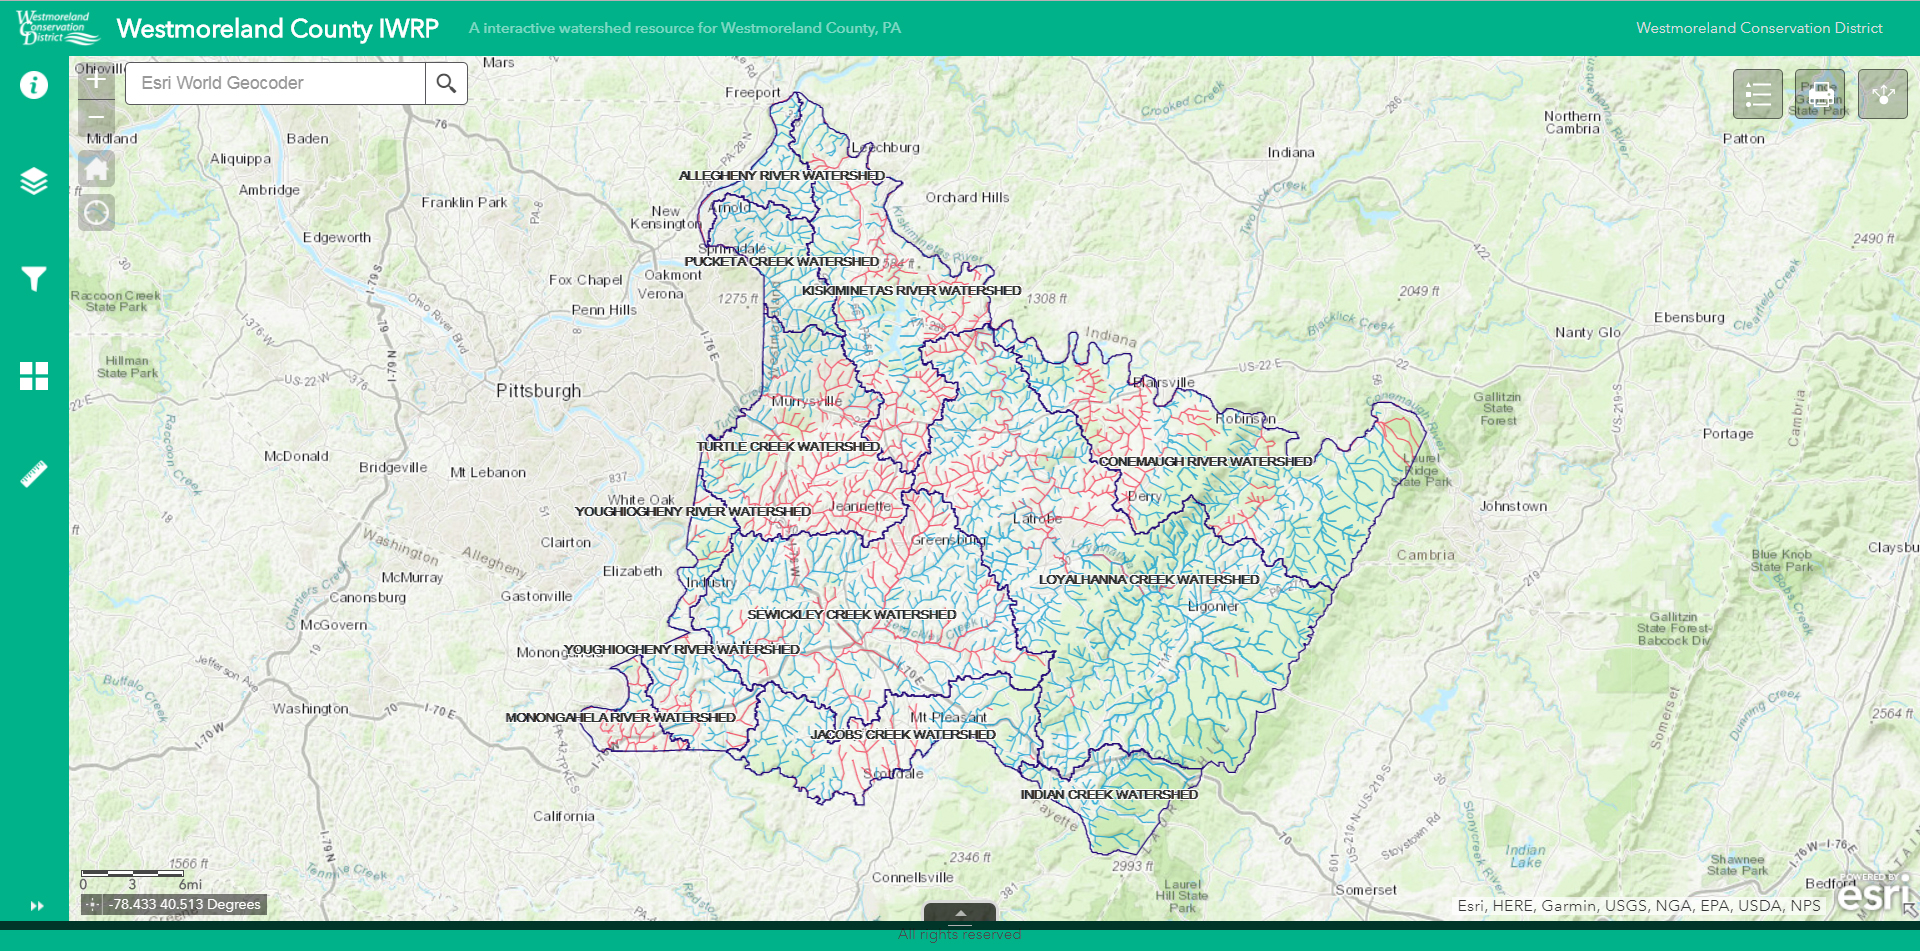 Interactive Mapping Westmoreland County IWRP